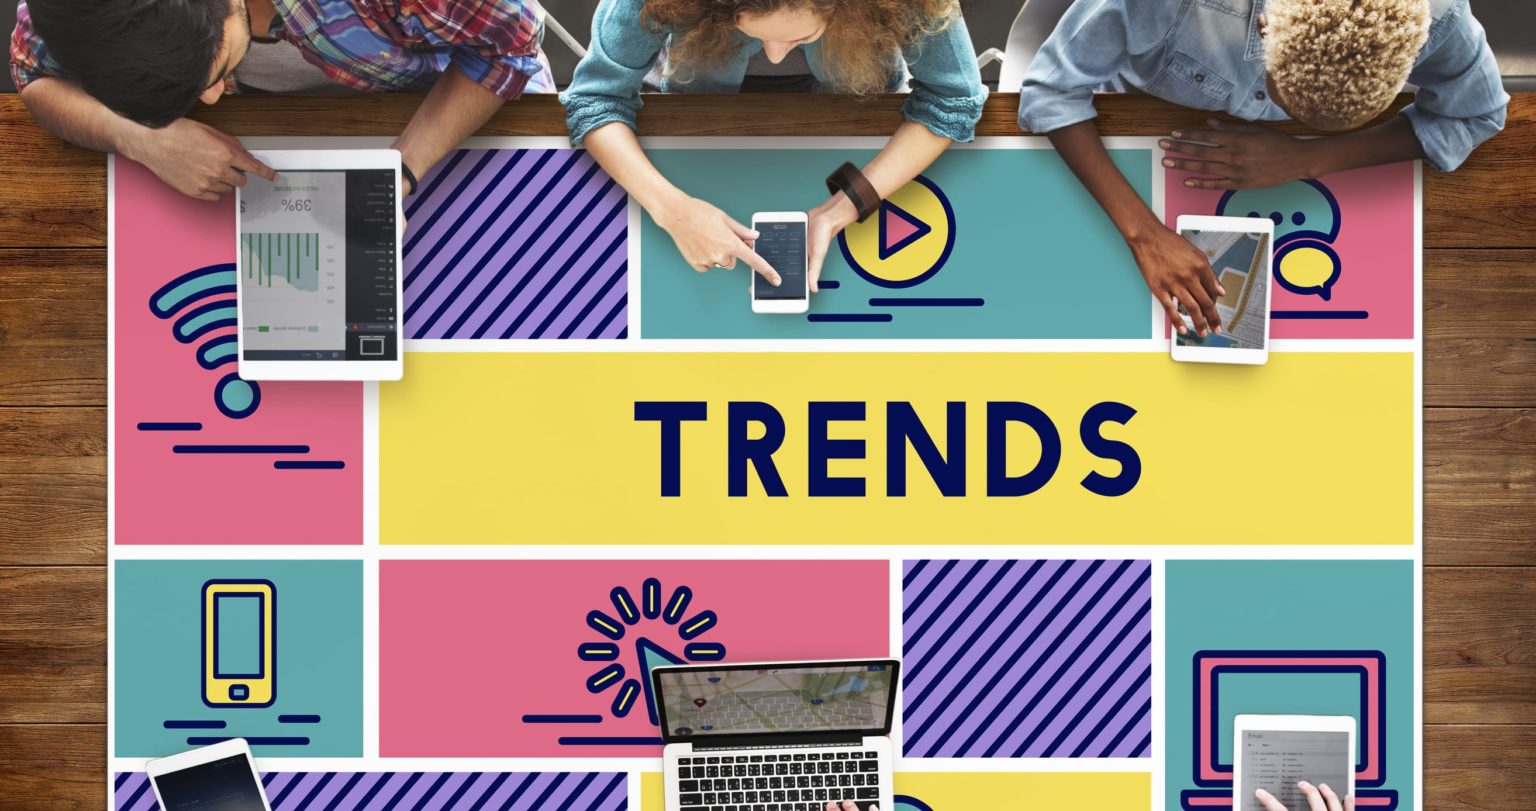 Stay updated with social media trends